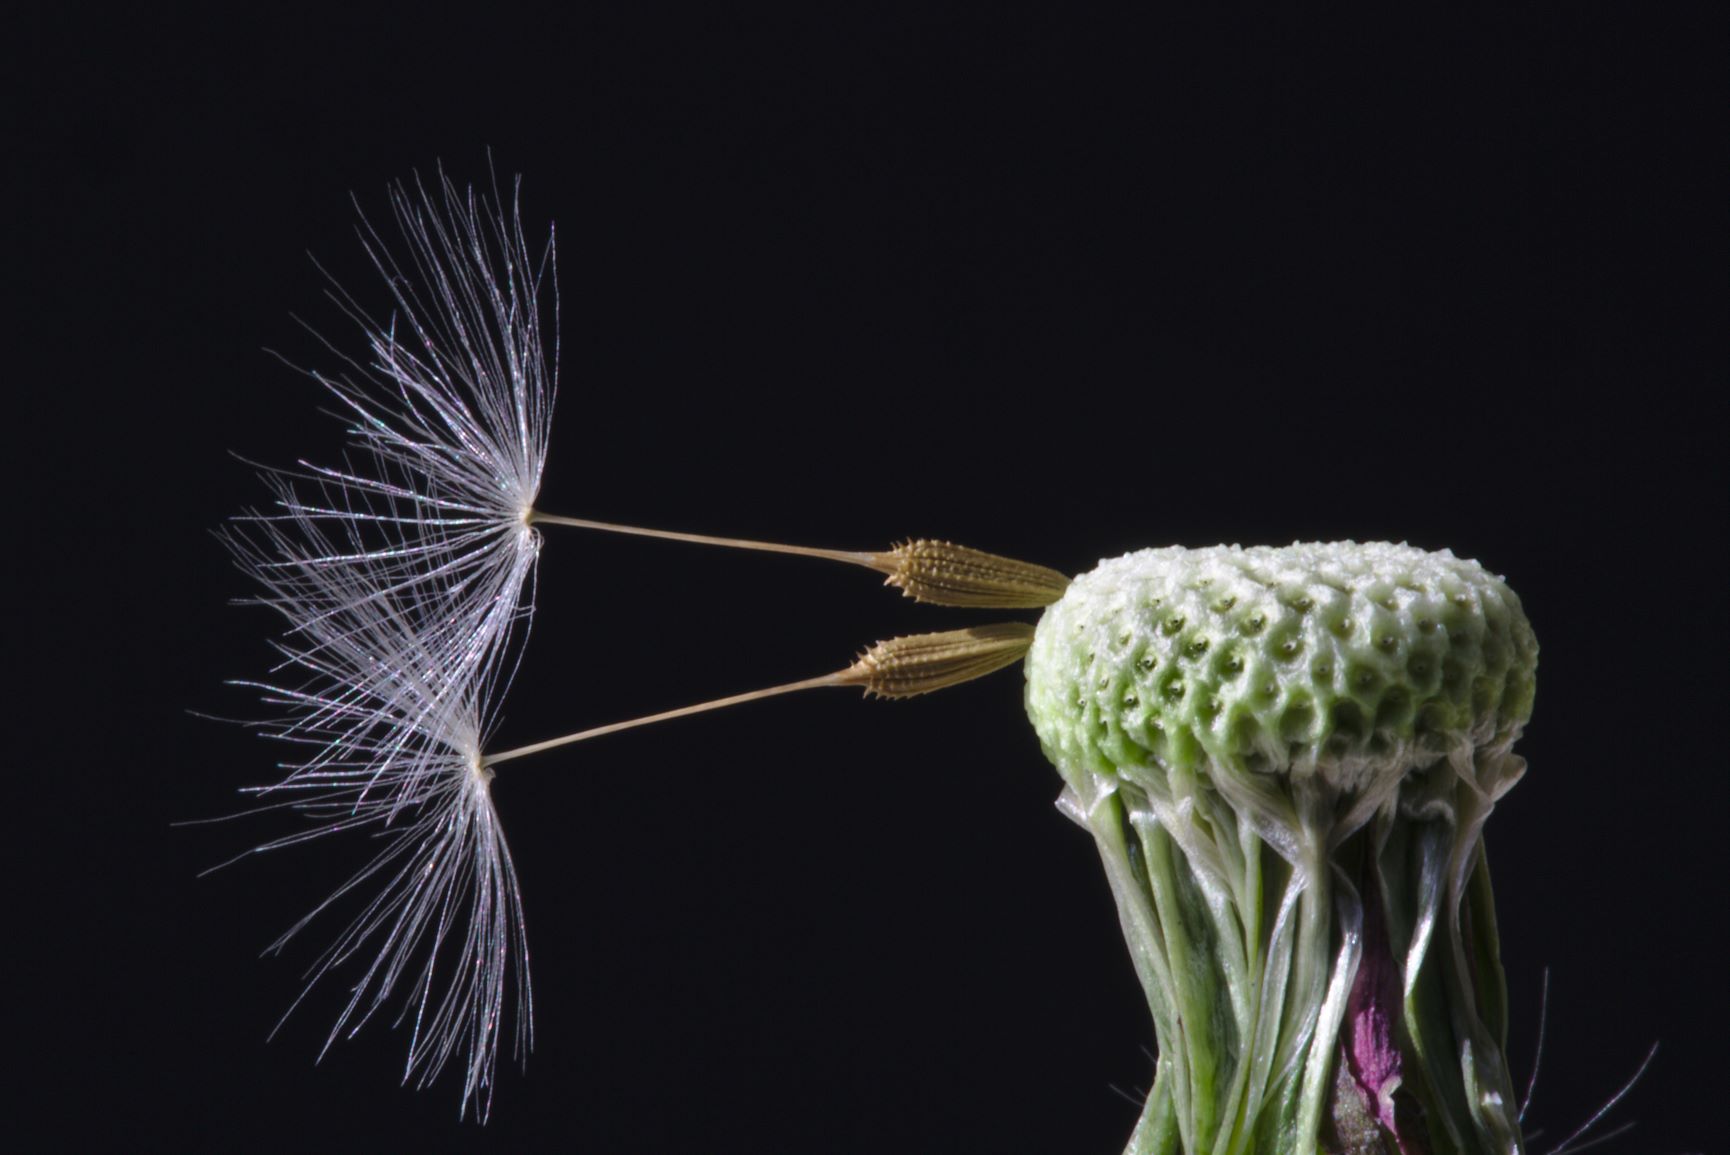 Intense closeup of two seeds left on the dandelion. Used here in reference to Desire and Pride as a seed of desire metaphor.